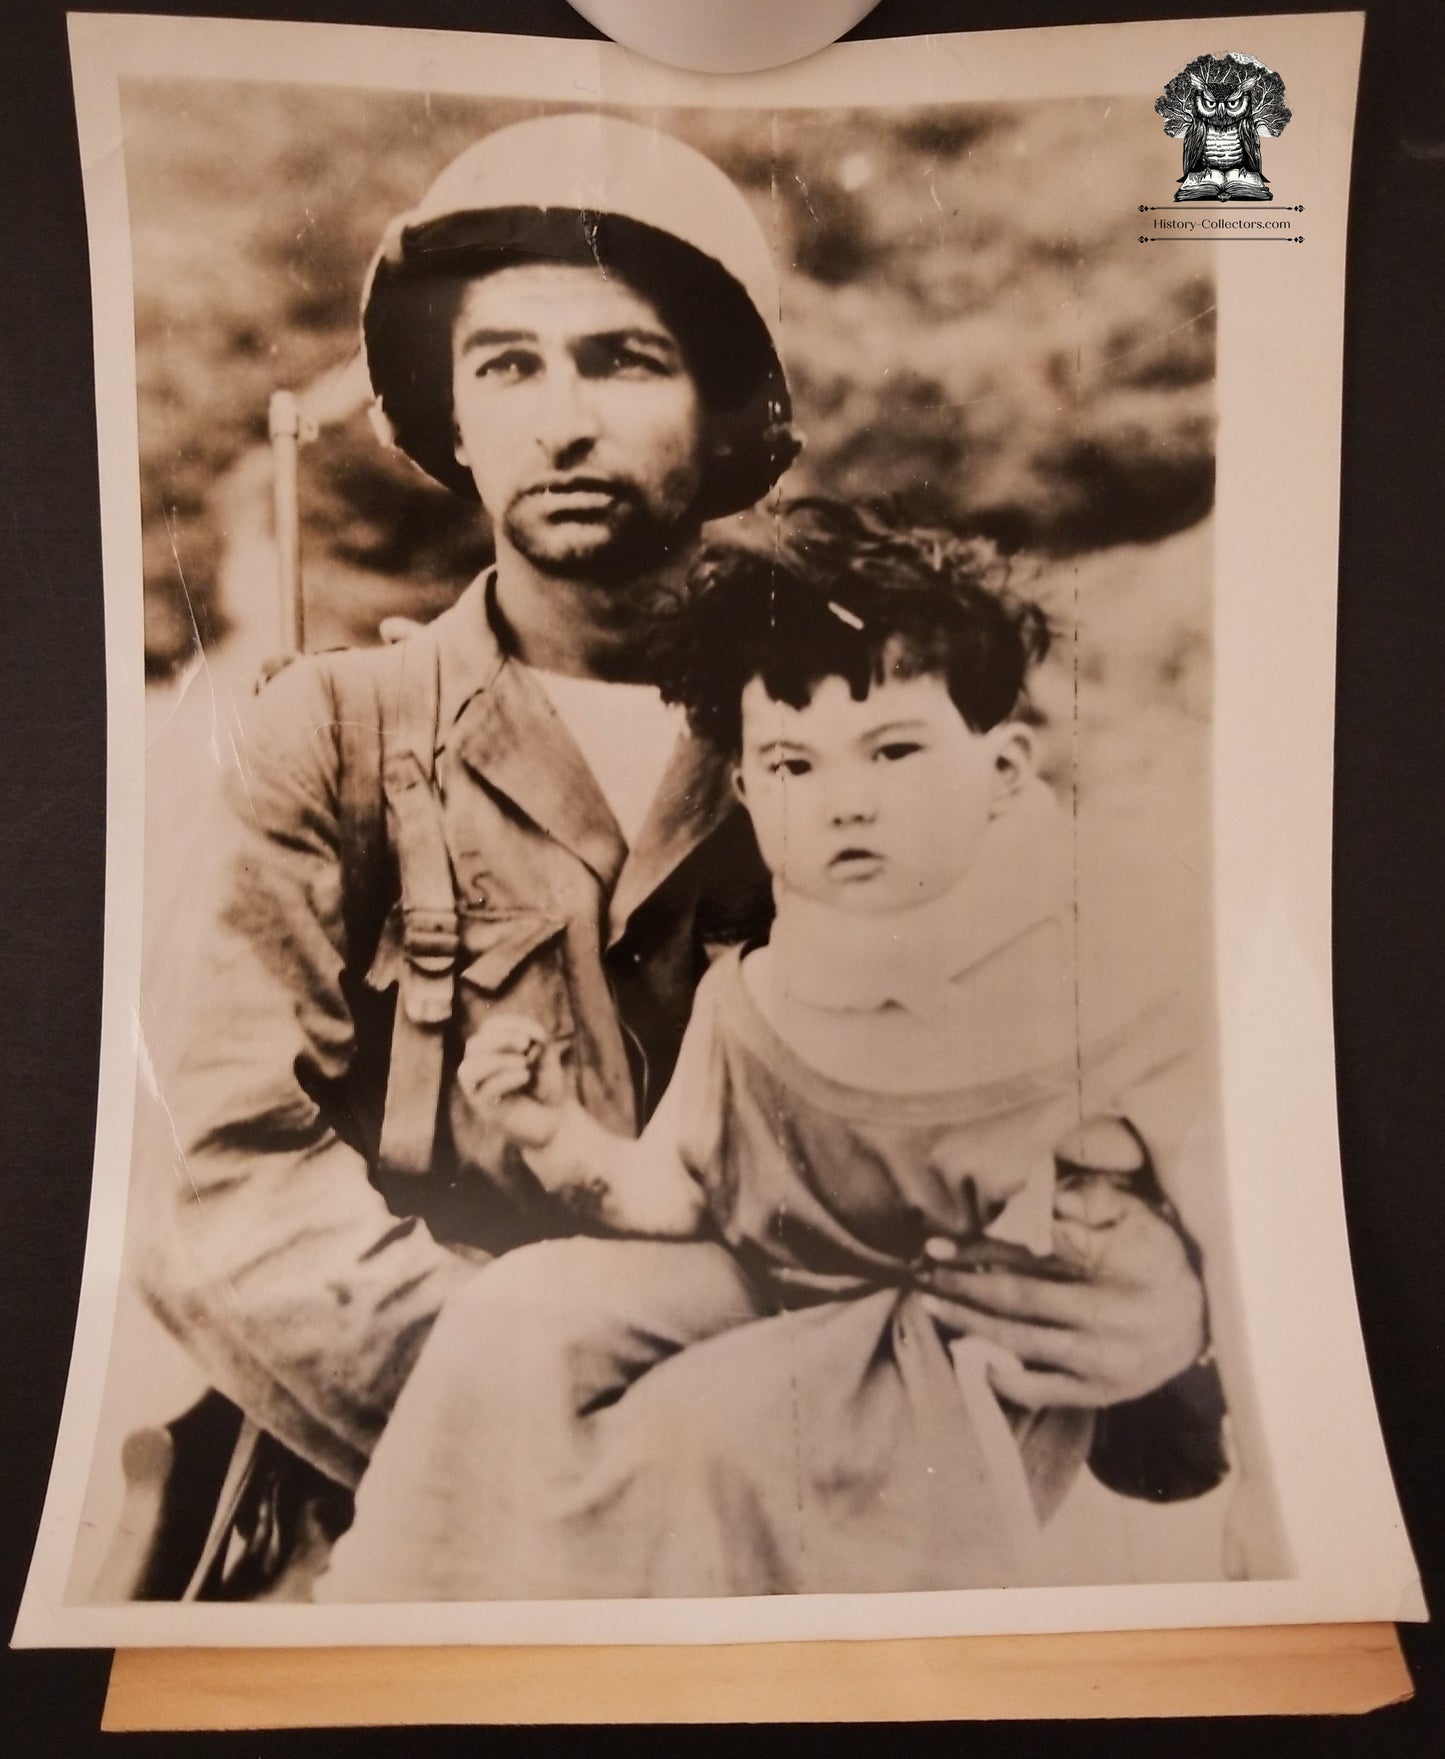 1945 WWII Acme Newspictures Signal Corps Radio Telephoto New York Bureau - First Sgt John S Evans Springfield SC With Okinawan Child - US Army 77th Infantry Division - Battle For Tokashiki Shima The Kerama Retto